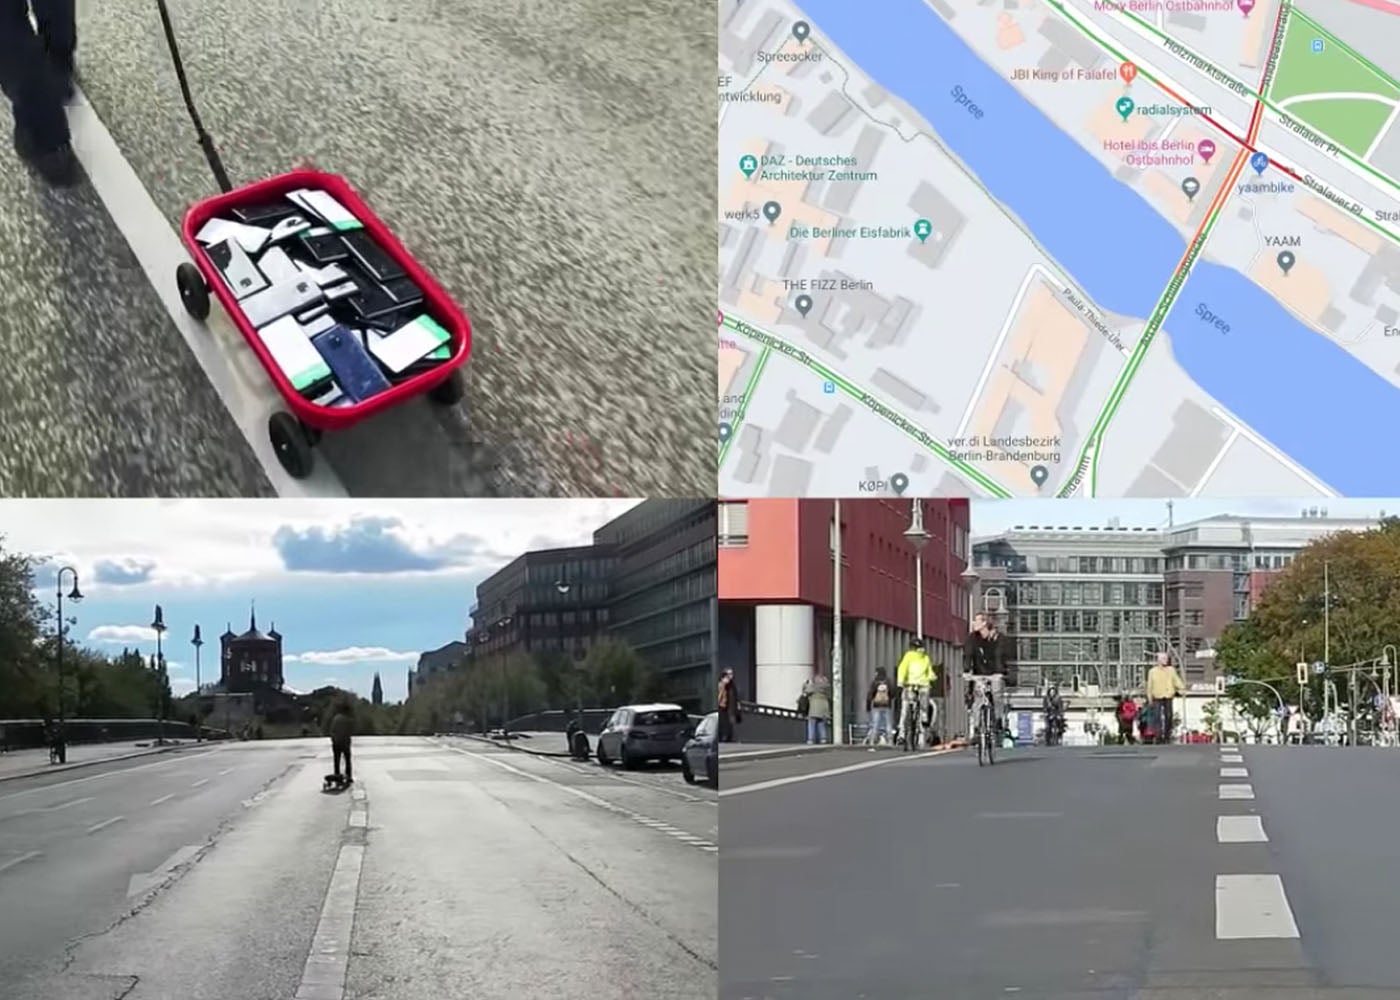 A user simulates a traffic jam on Google Maps with 99 mobiles and a cart